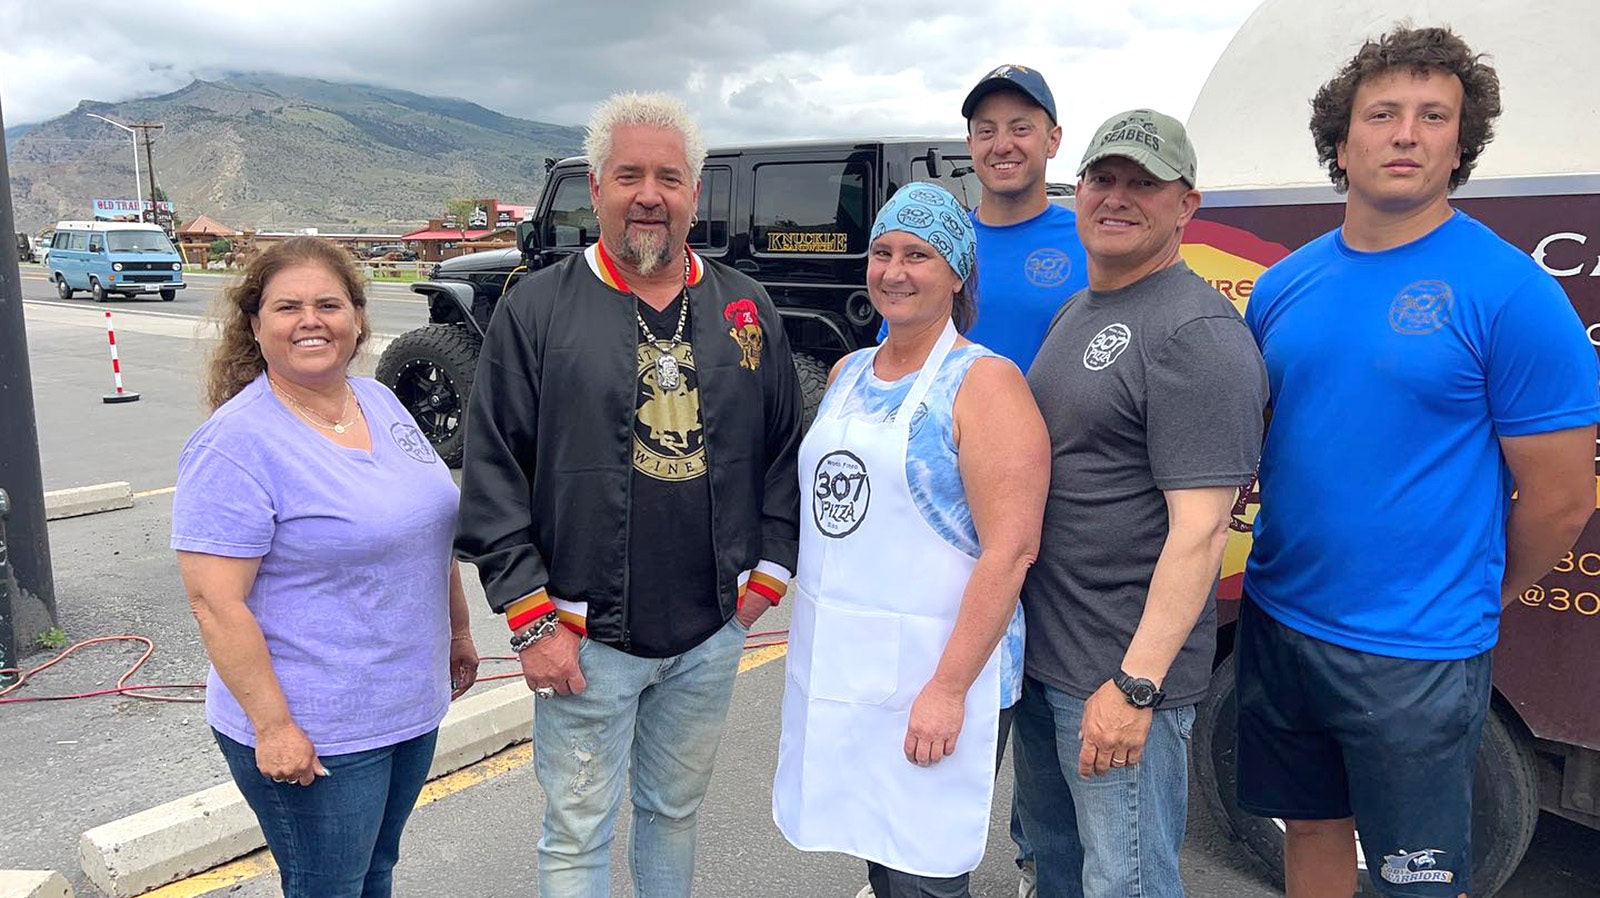 Cody Food Truck 307 Pizza will be on “Diners, Drive-Ins and Dives”